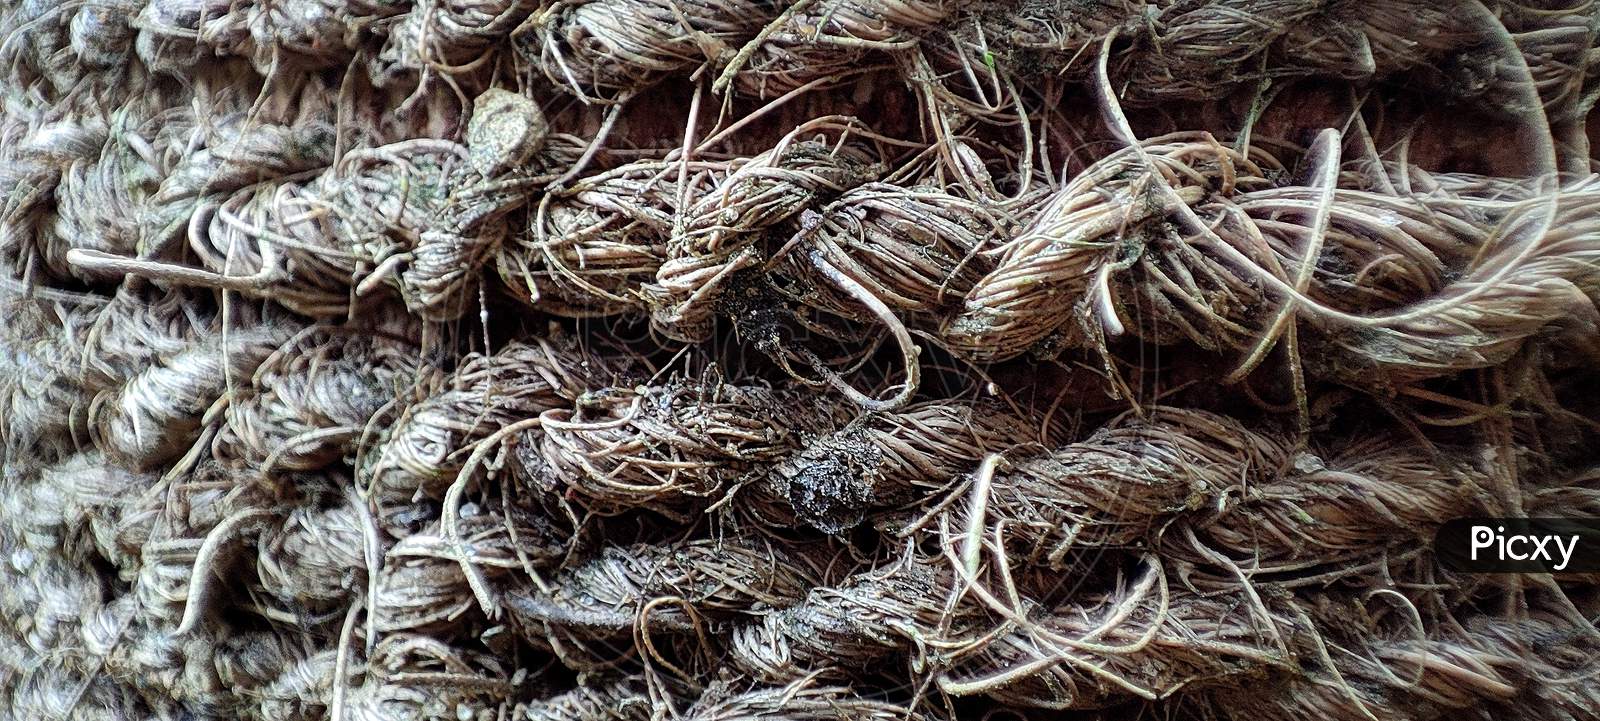 Image of Thick Coarse Hand-Knitted Rope Of Coconut Fiber.Coconut